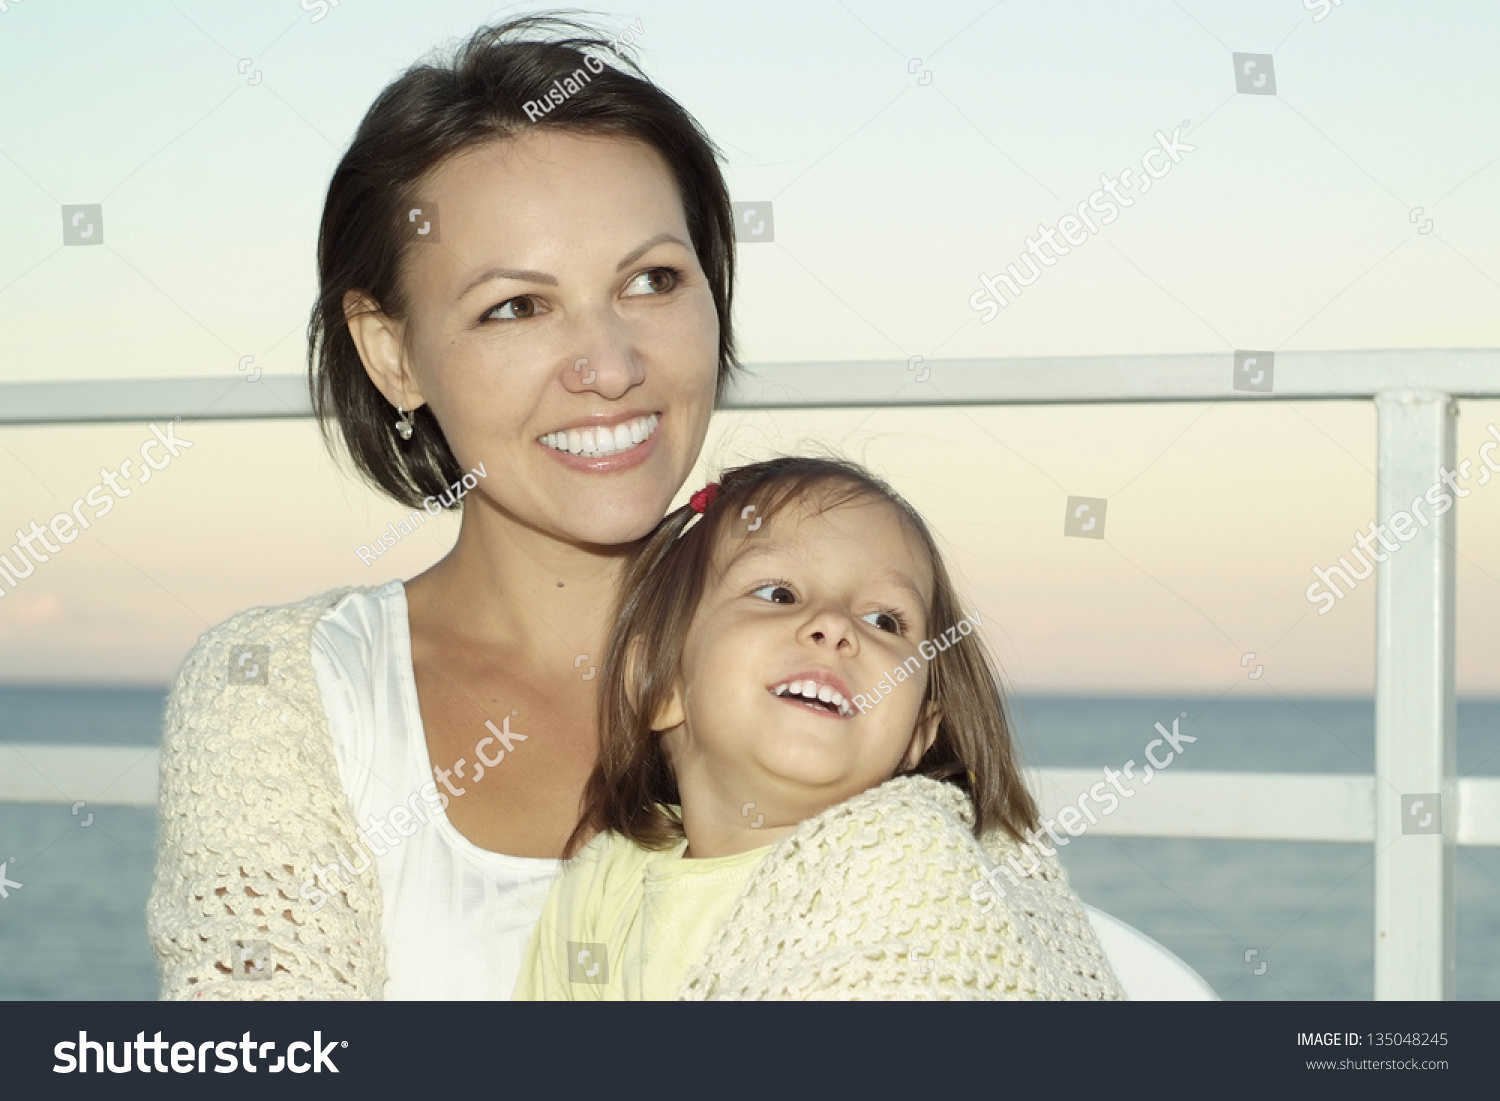 portrait of young happy woman with a young daughter on vacation #135048245